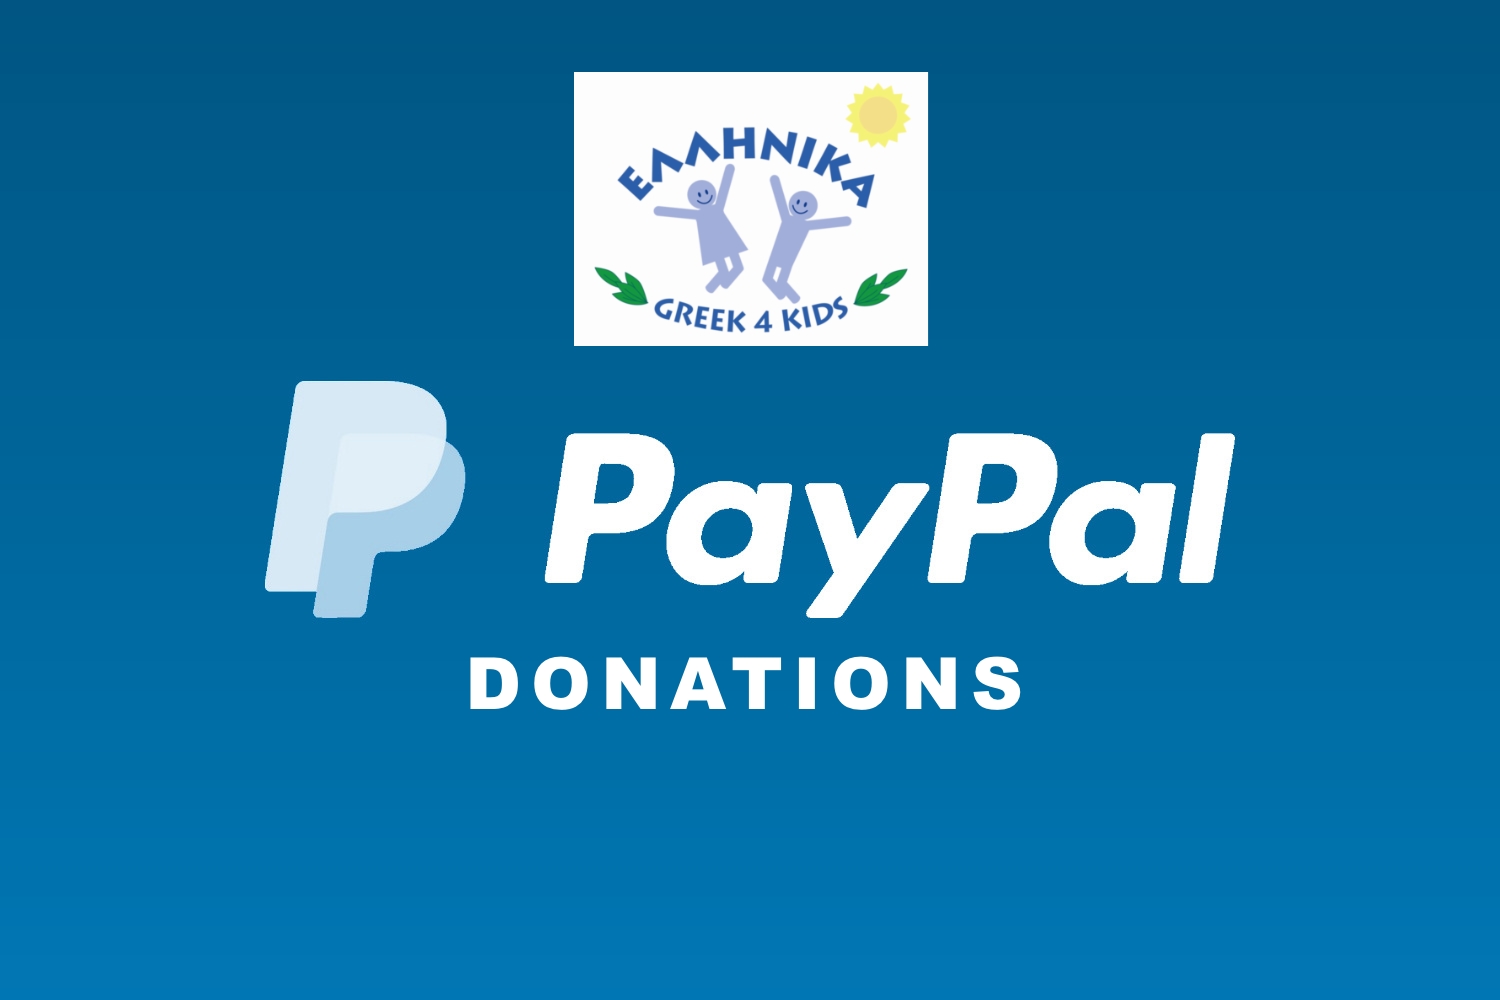 Paypal Donations for Greek 4 Kids